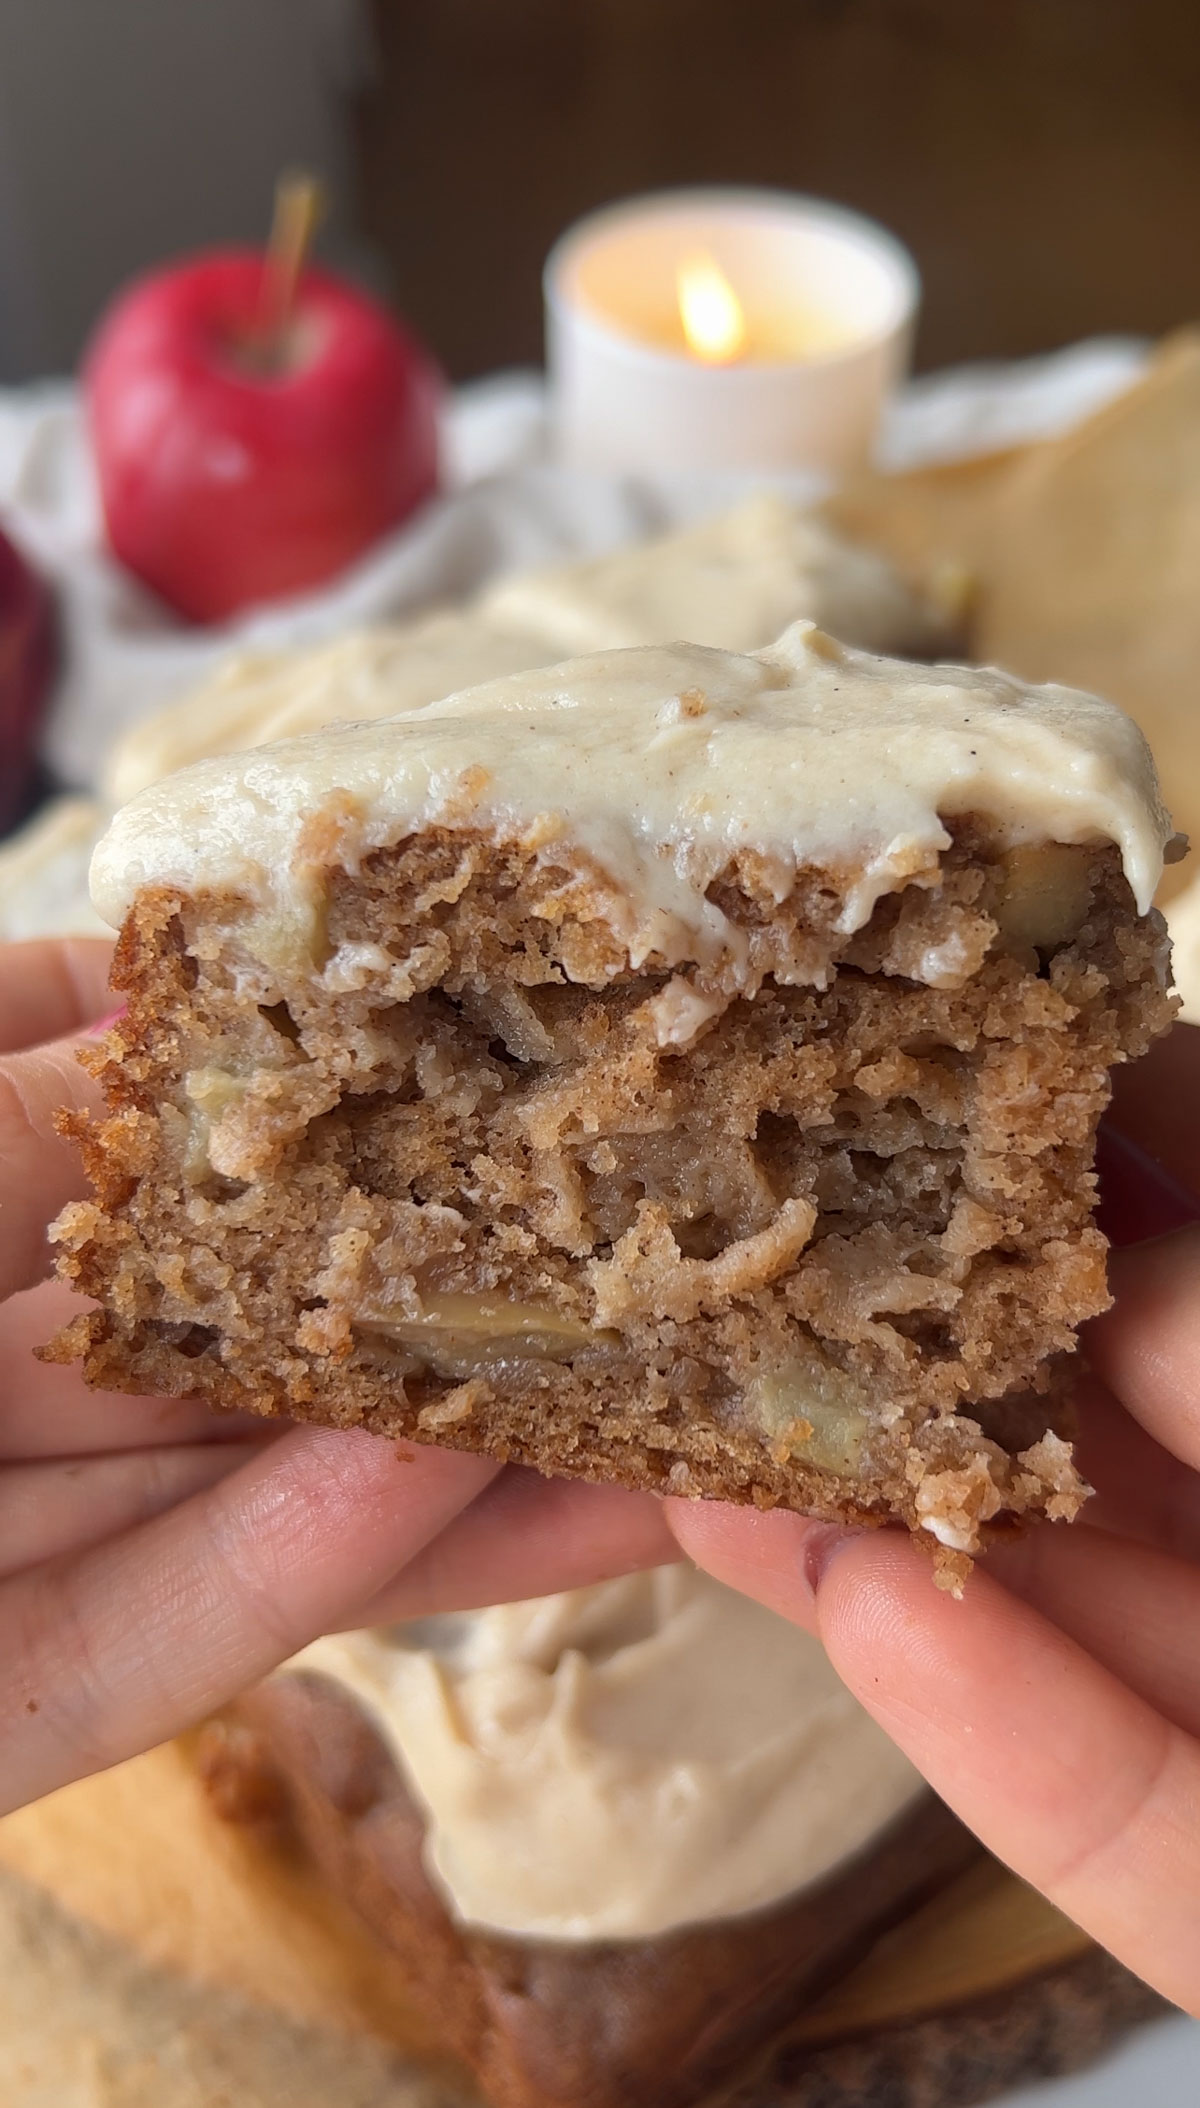 Hands holding up a piece of vegan apple cake.